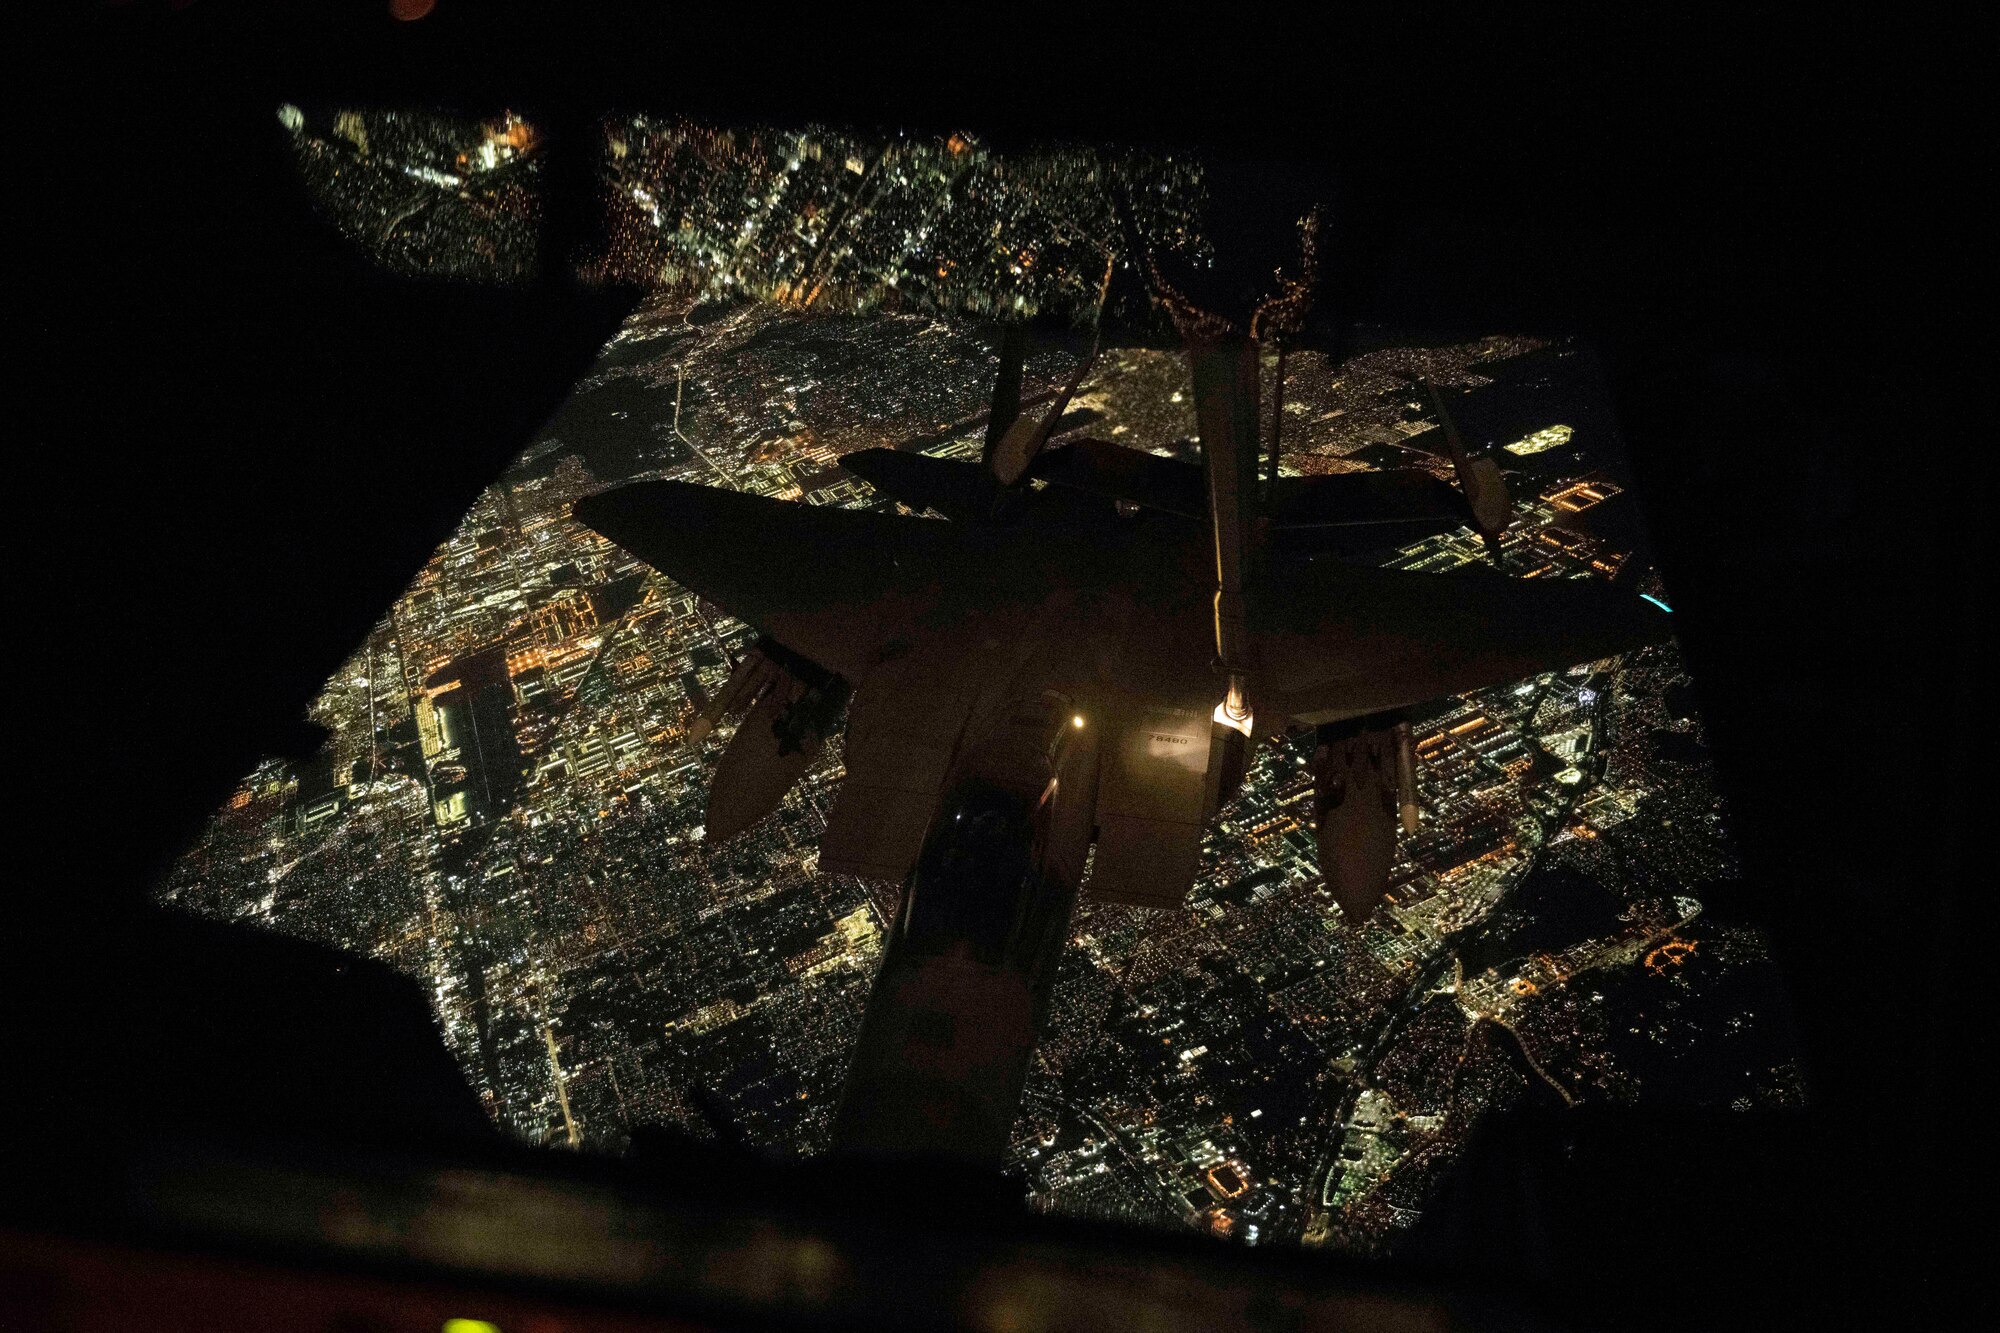 An F-15E Strike Eagle refuels over Los Angeles at night